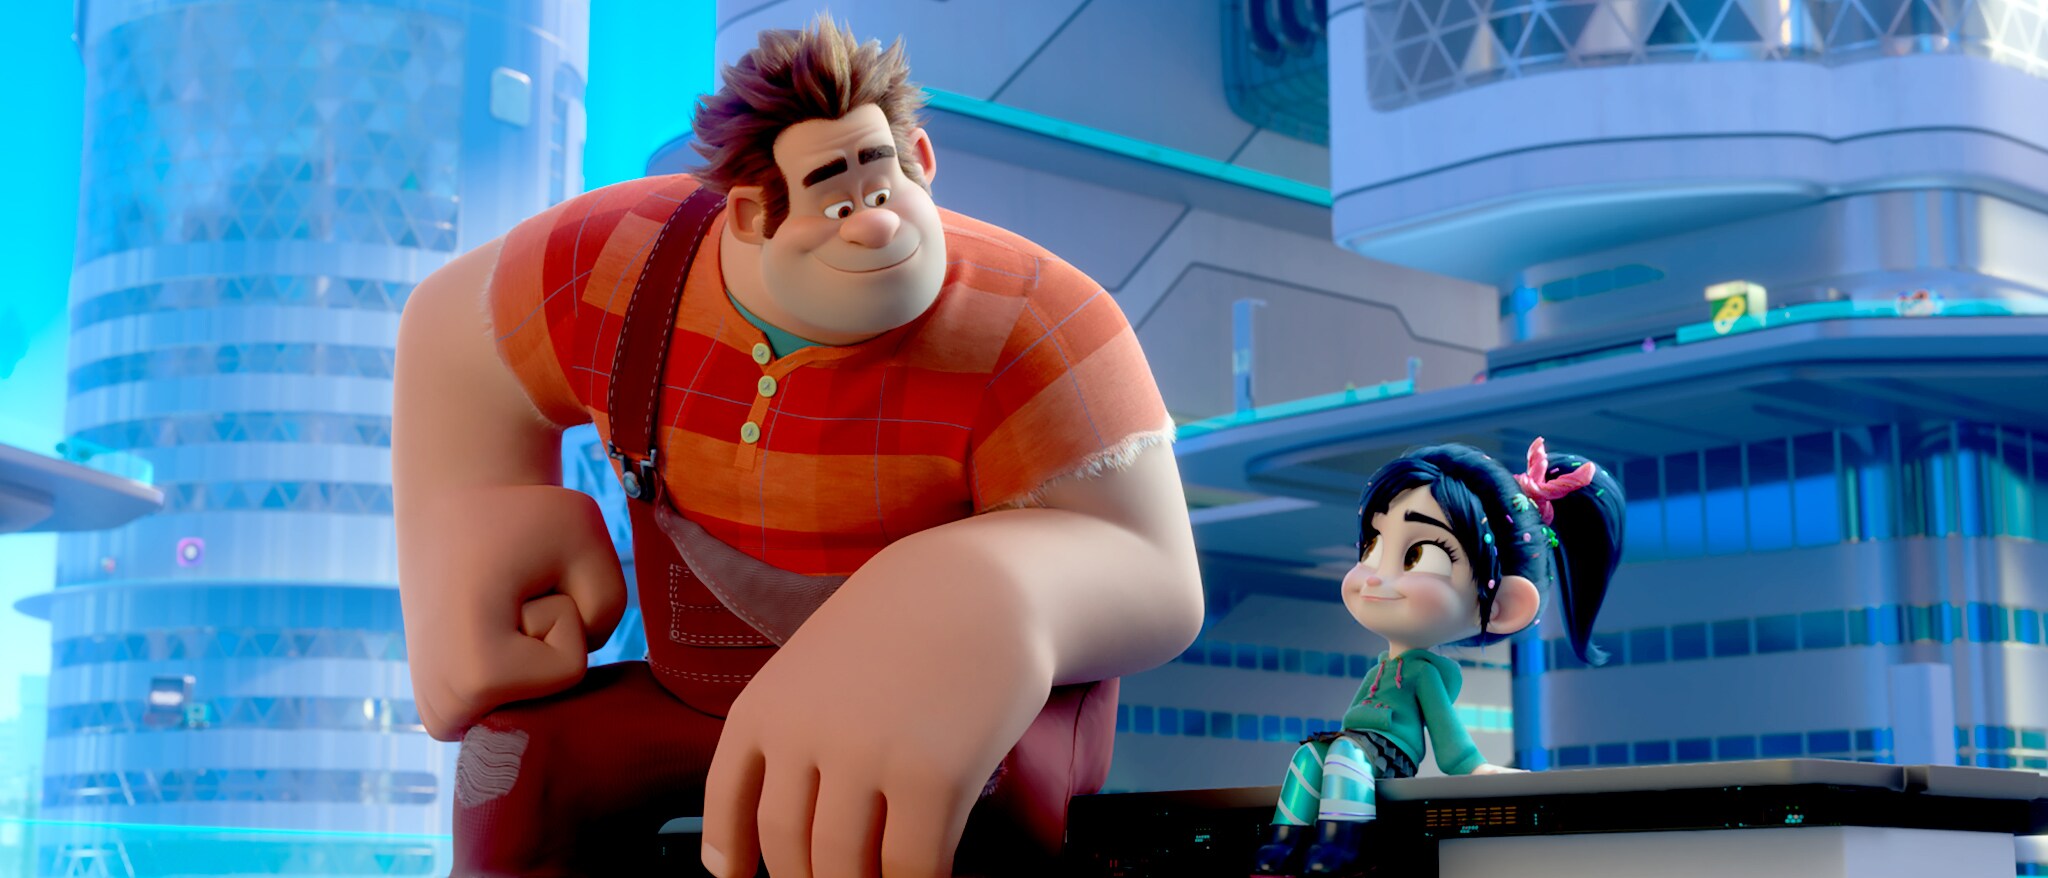 download wreck it ralph full movie free